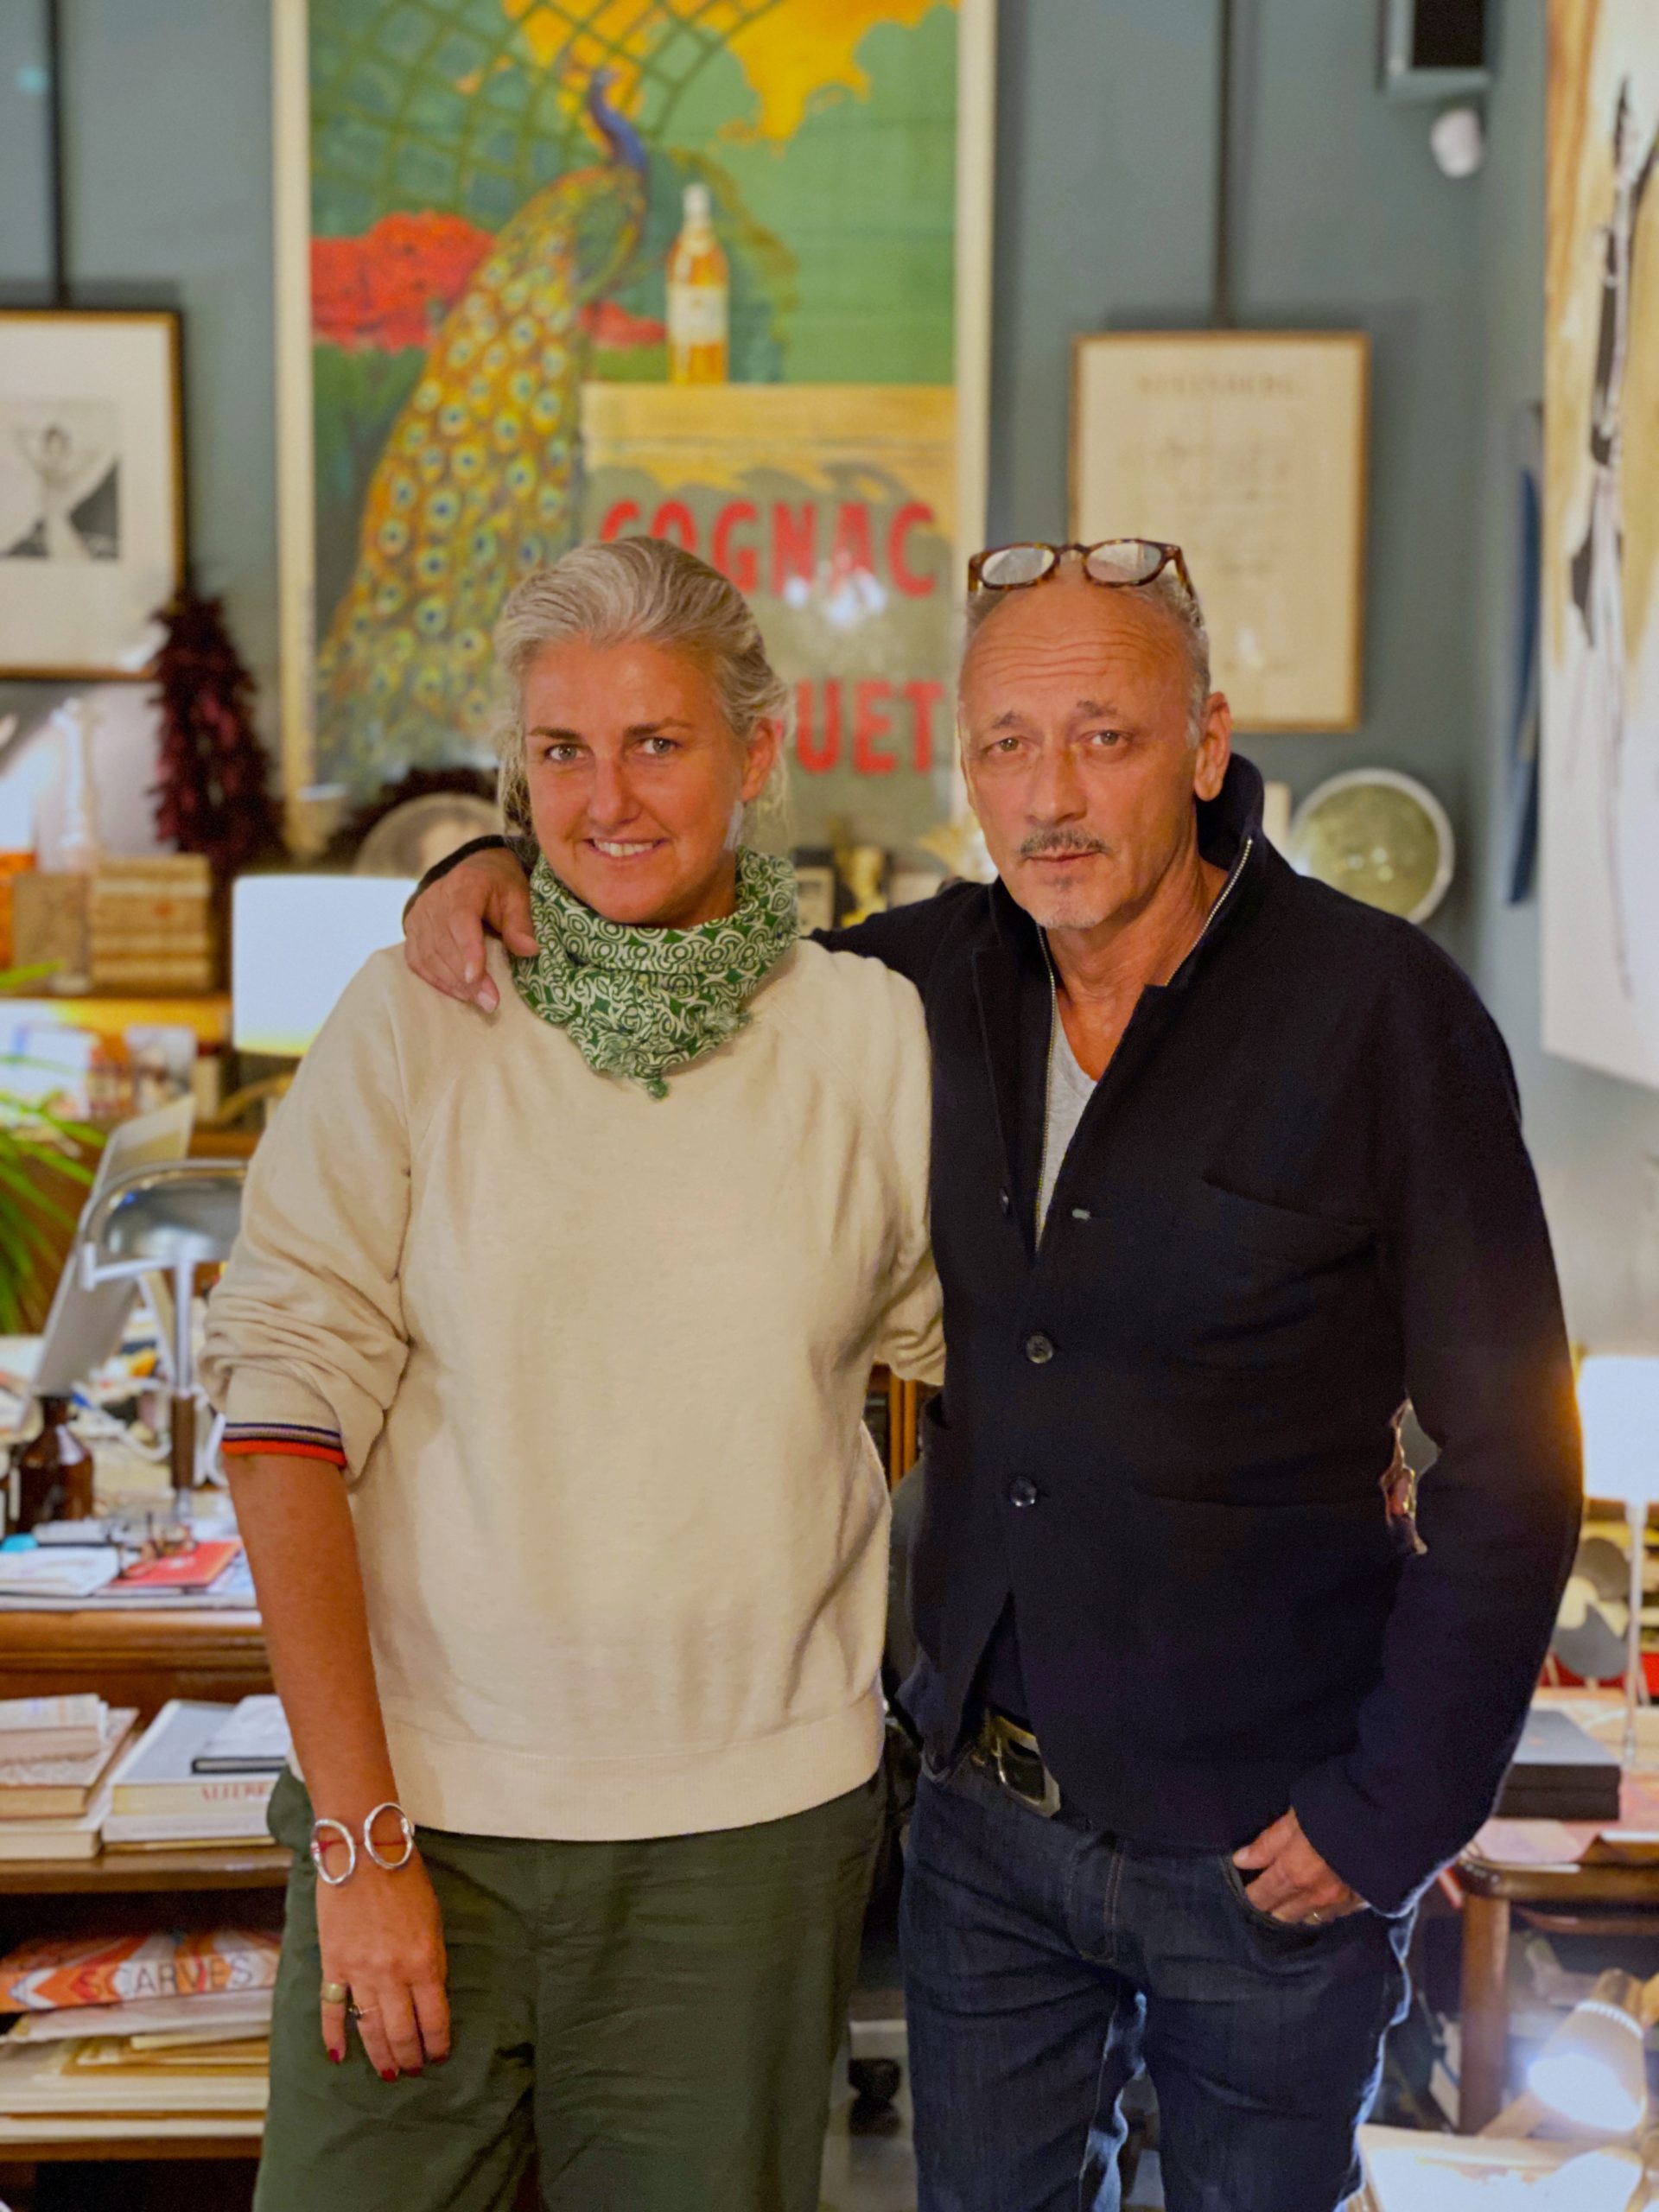 Daria Reina and Andrea Ferolla in their studio behind the shop.